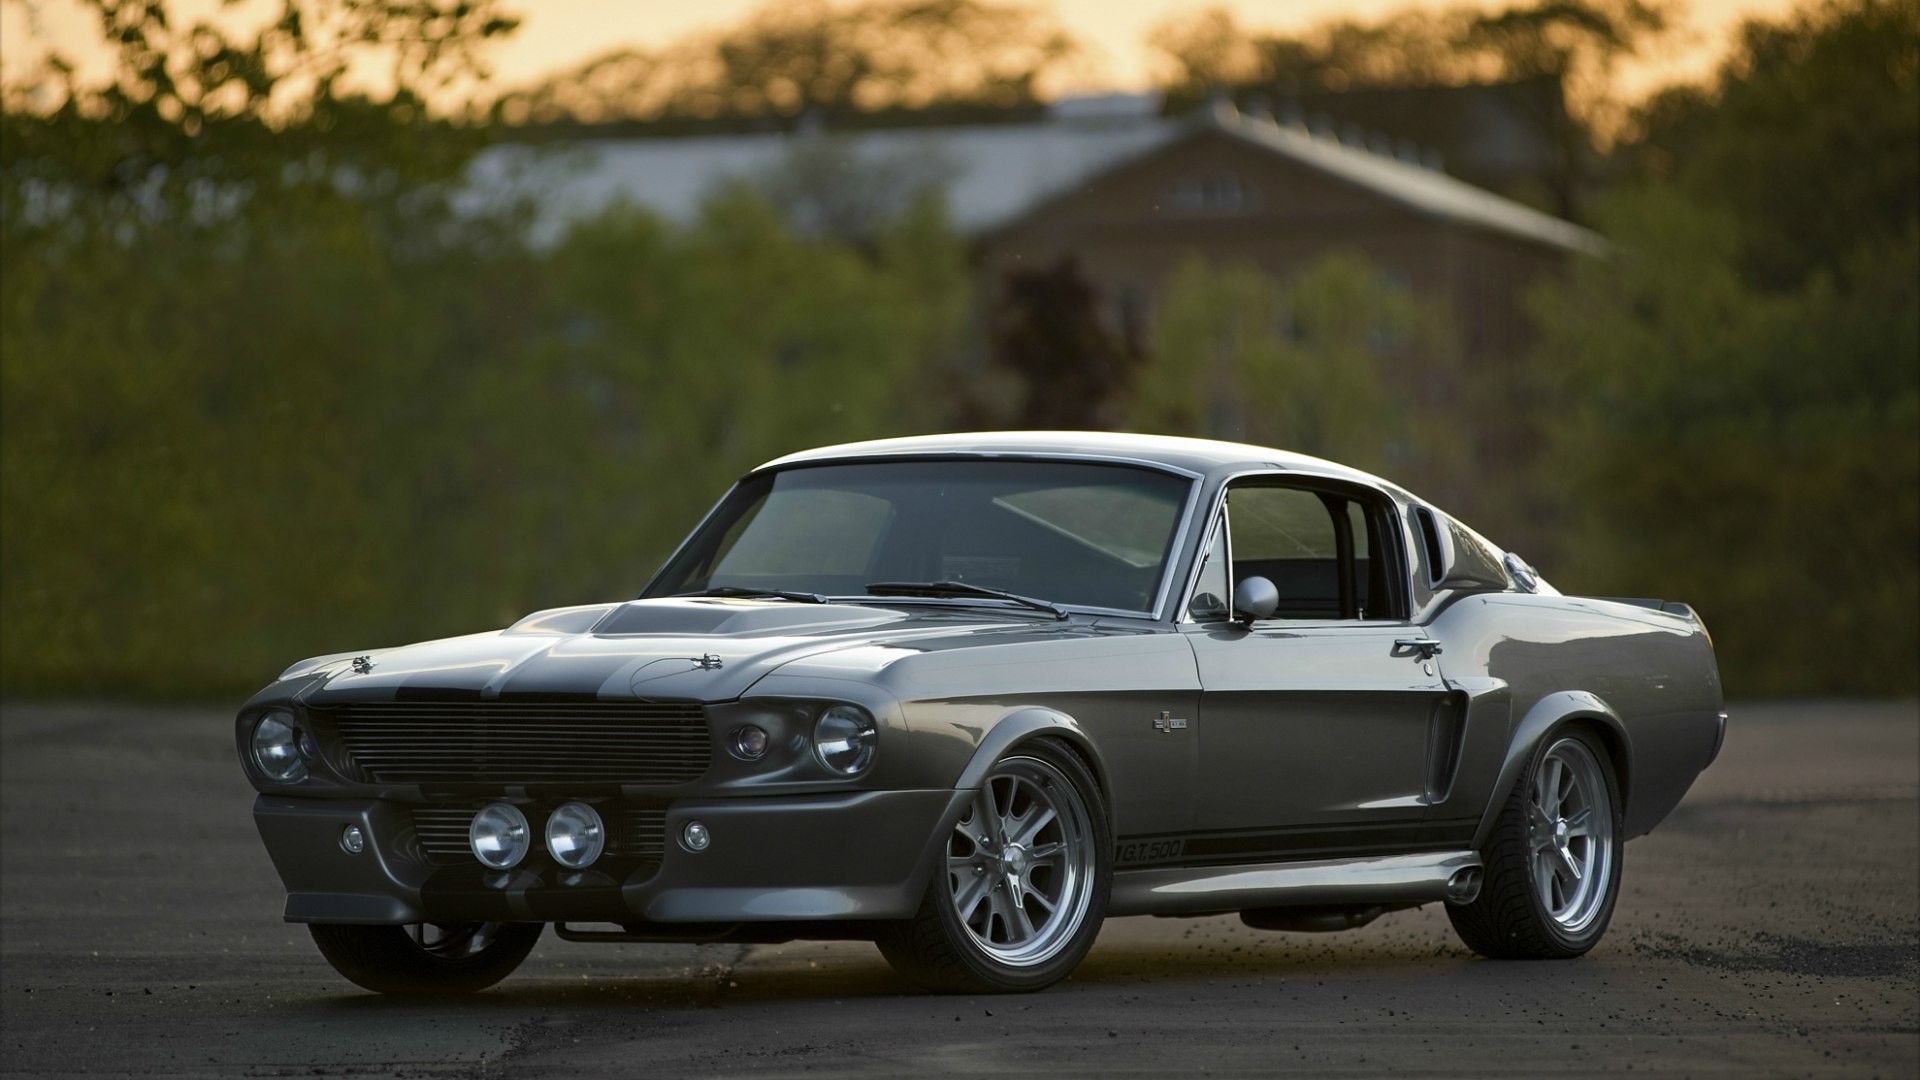 1967 Shelby Gt500 Eleanor Wallpaper (69+ images)
 1967 Ford Mustang Eleanor